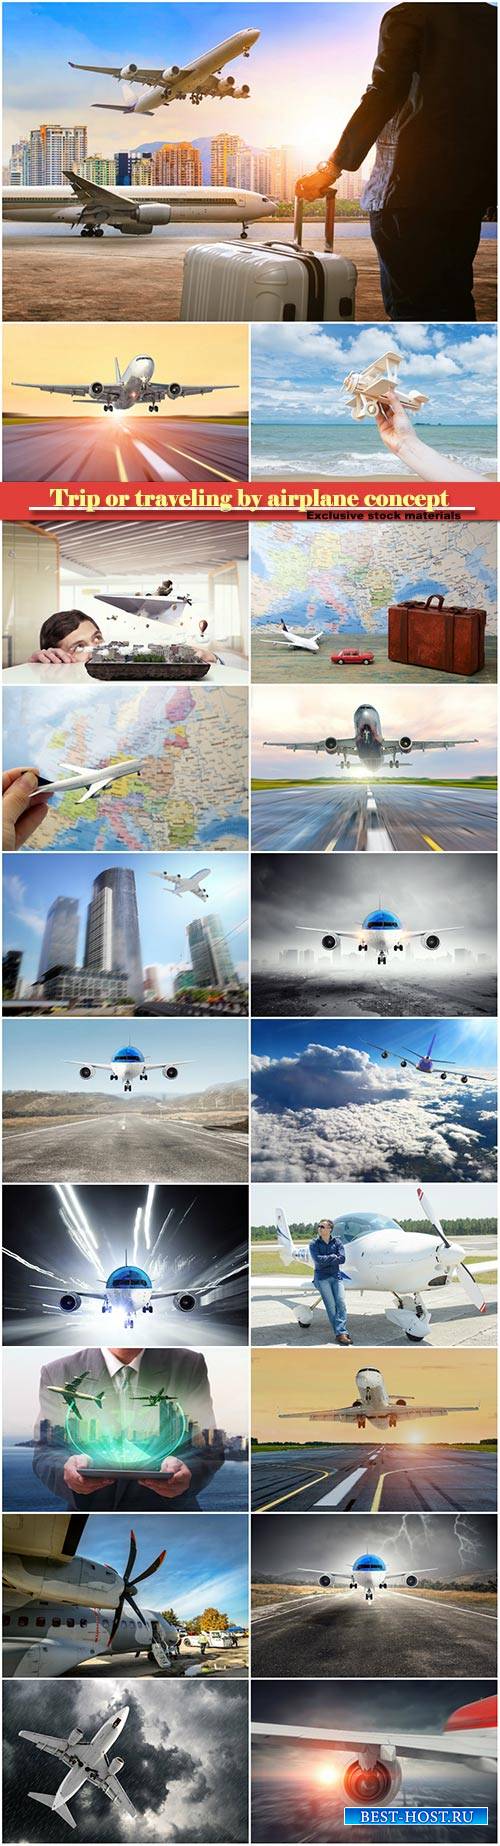 Trip or traveling by airplane concept